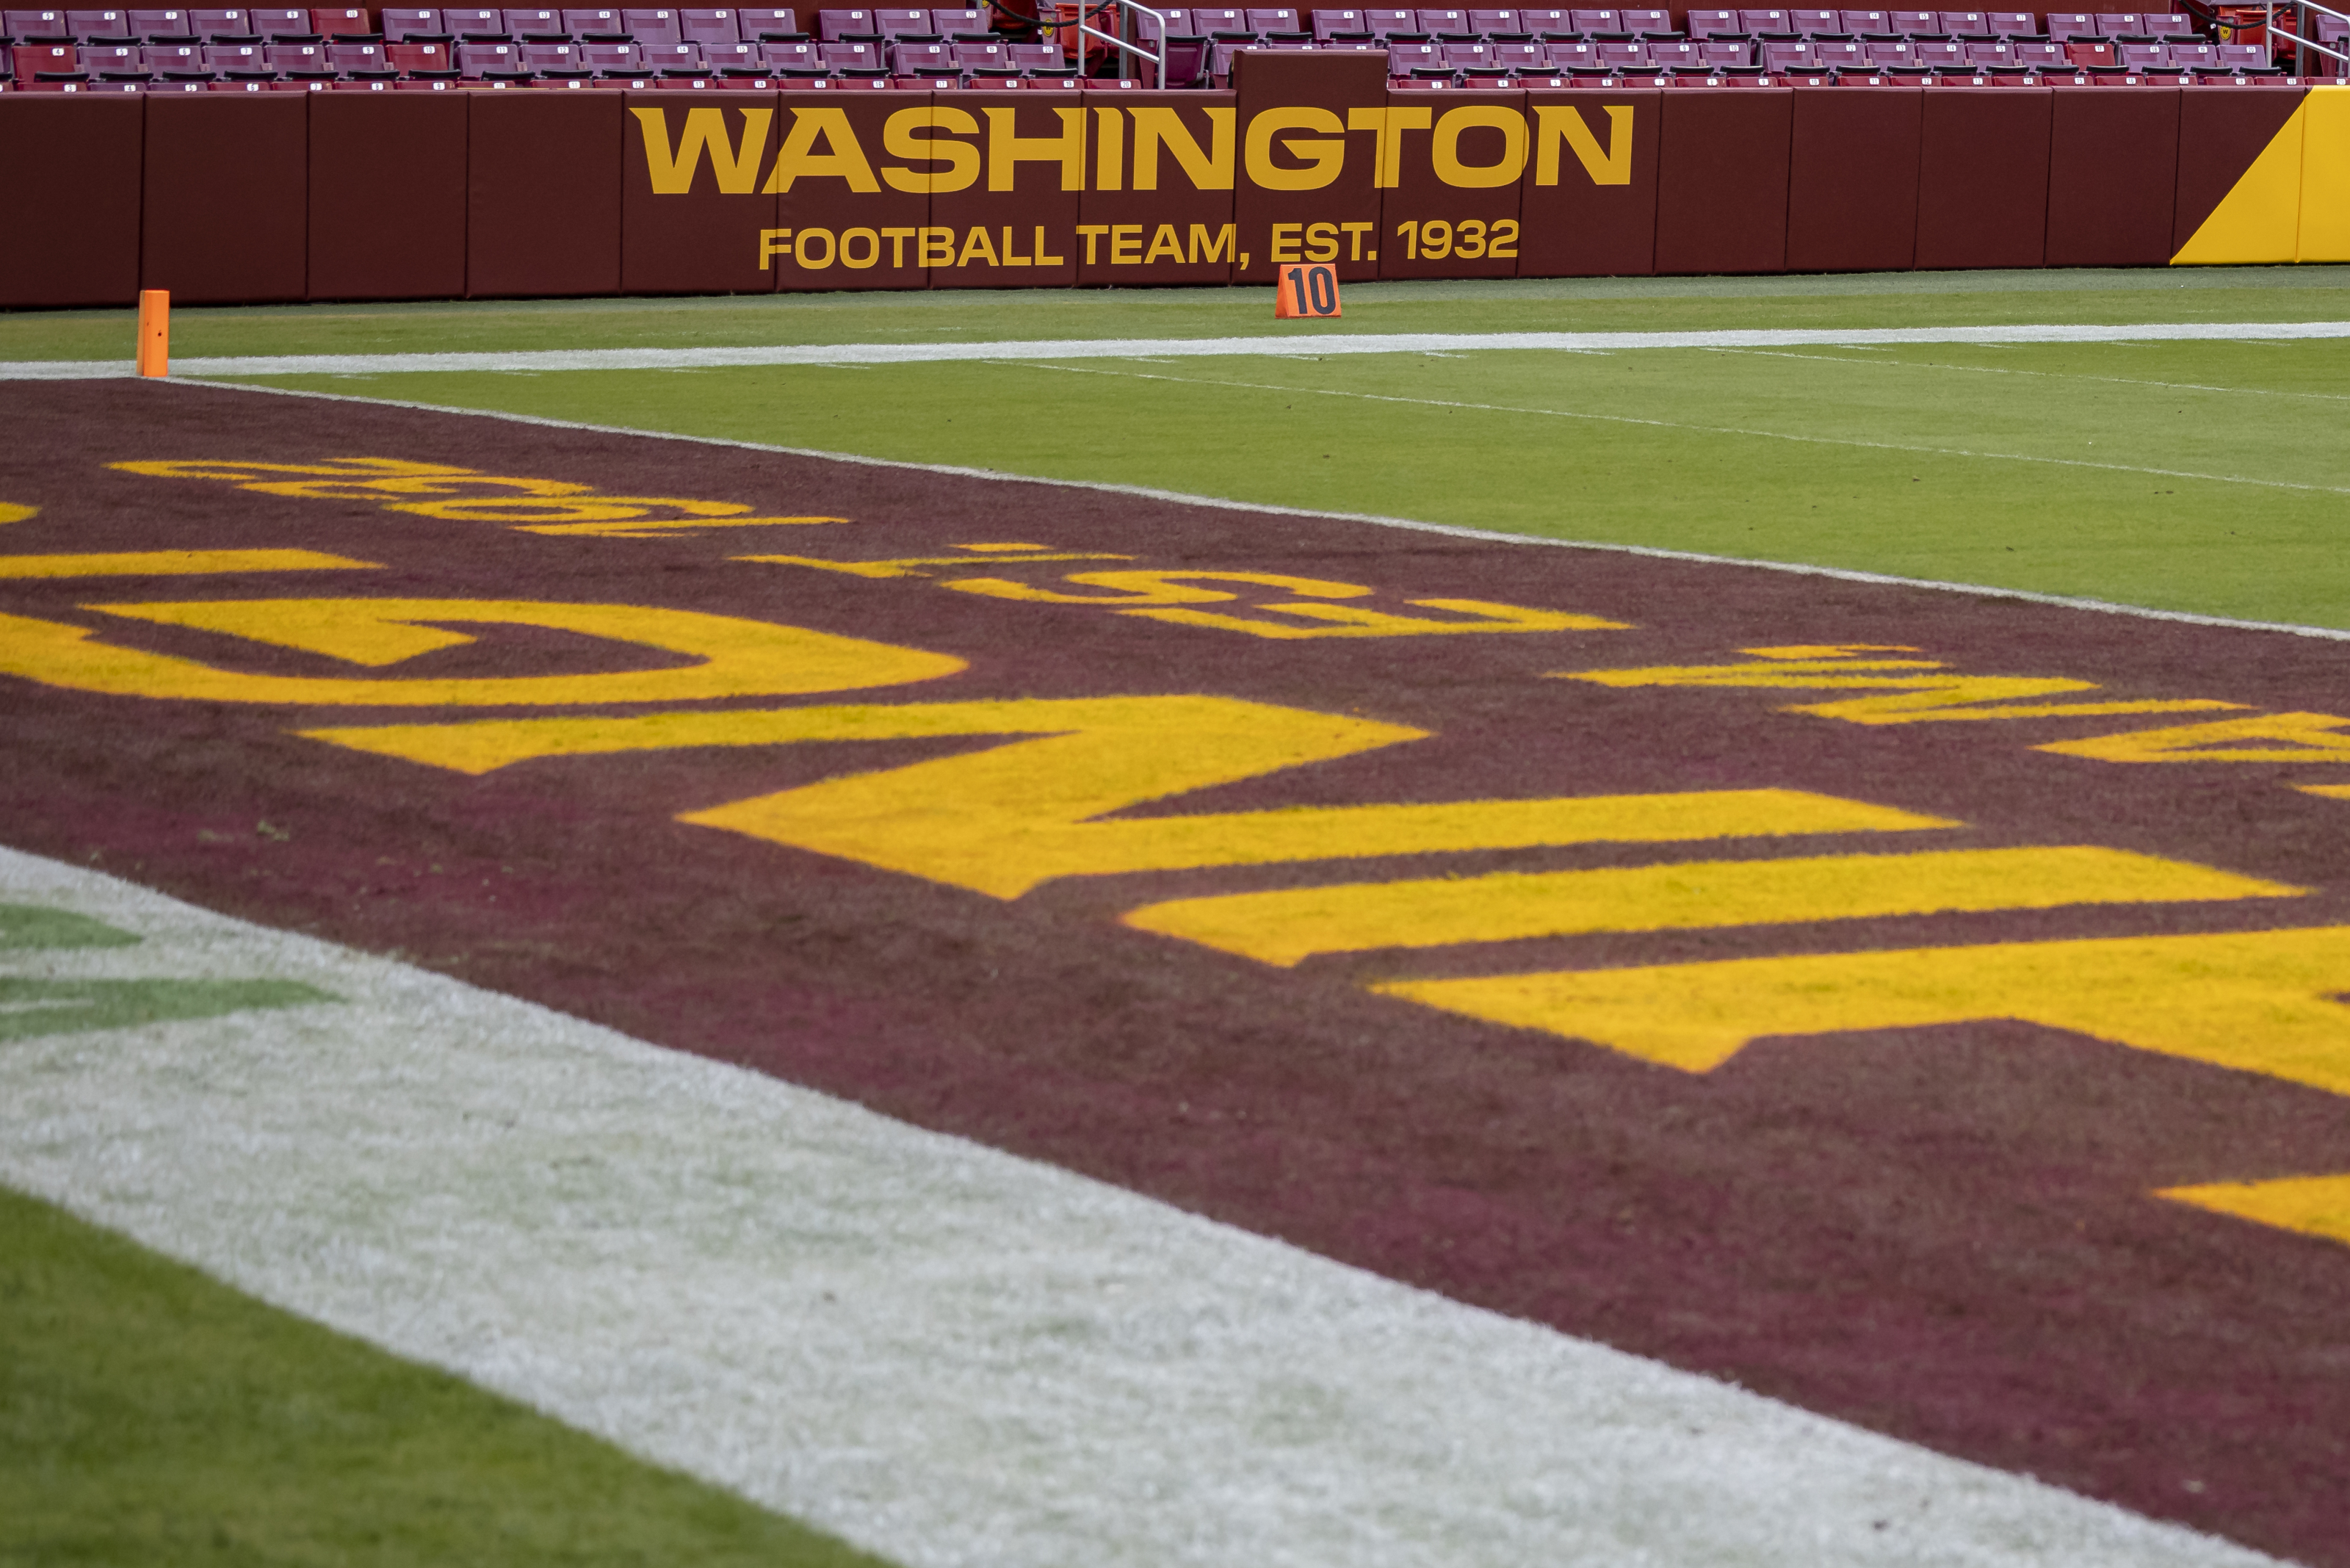 Madden 23 will likely have Washington Football Team's new name